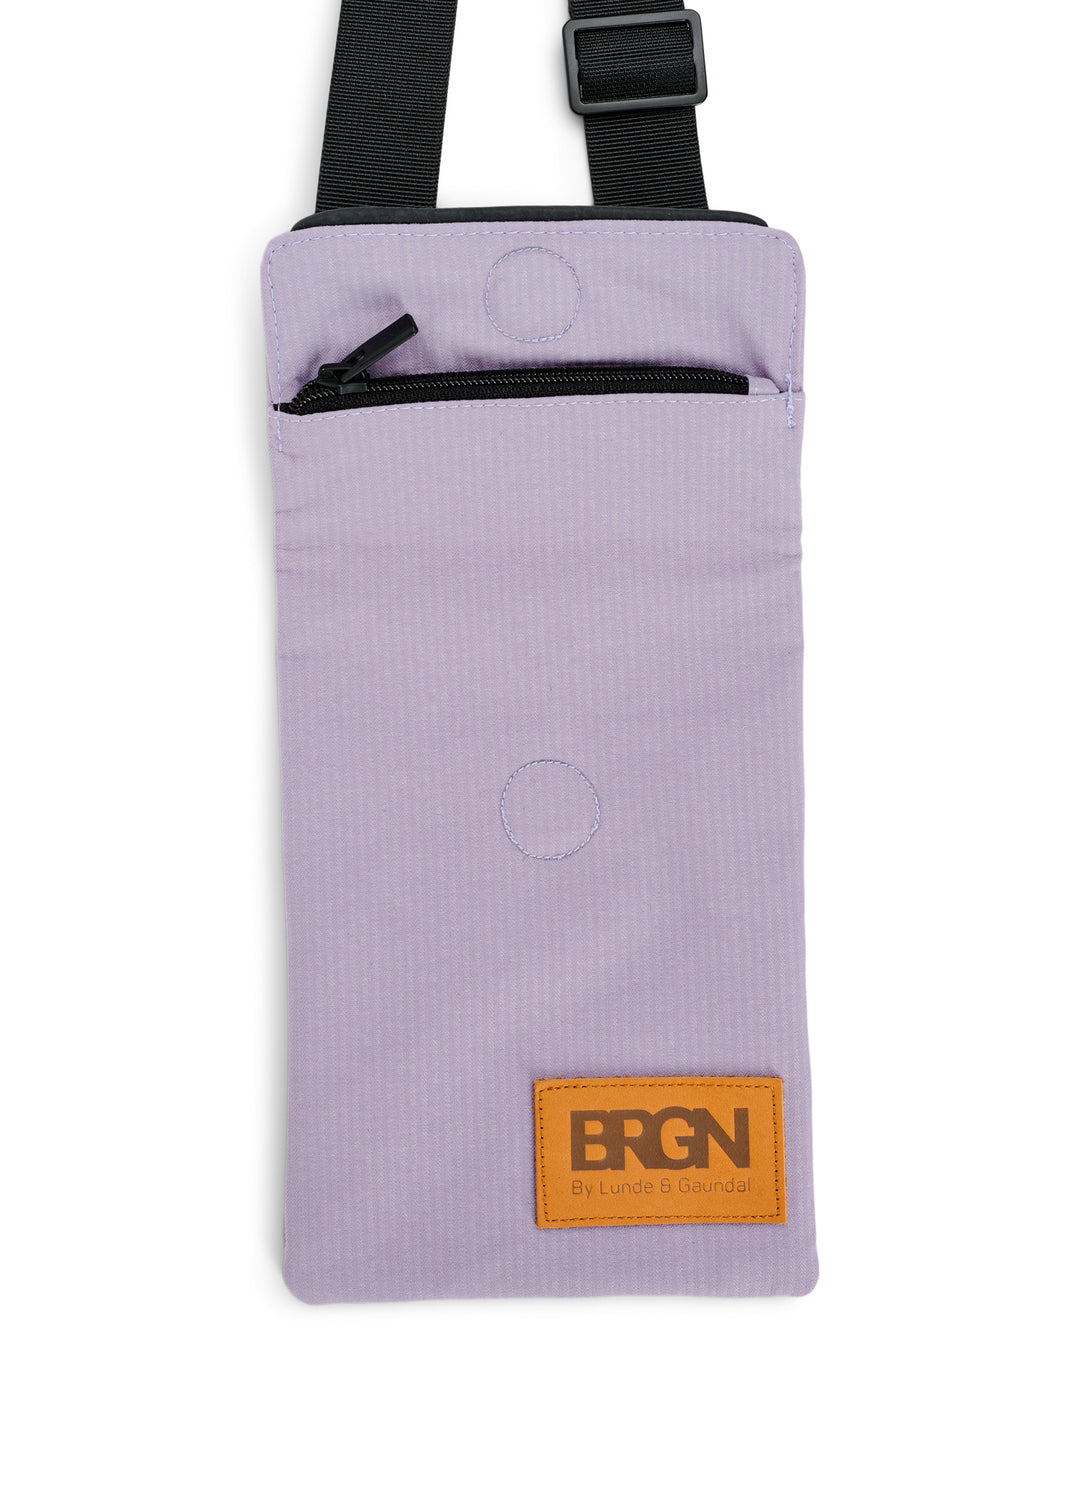 BRGN by Lunde & Gaundal Messenger Purse Accessories 700 Lilac